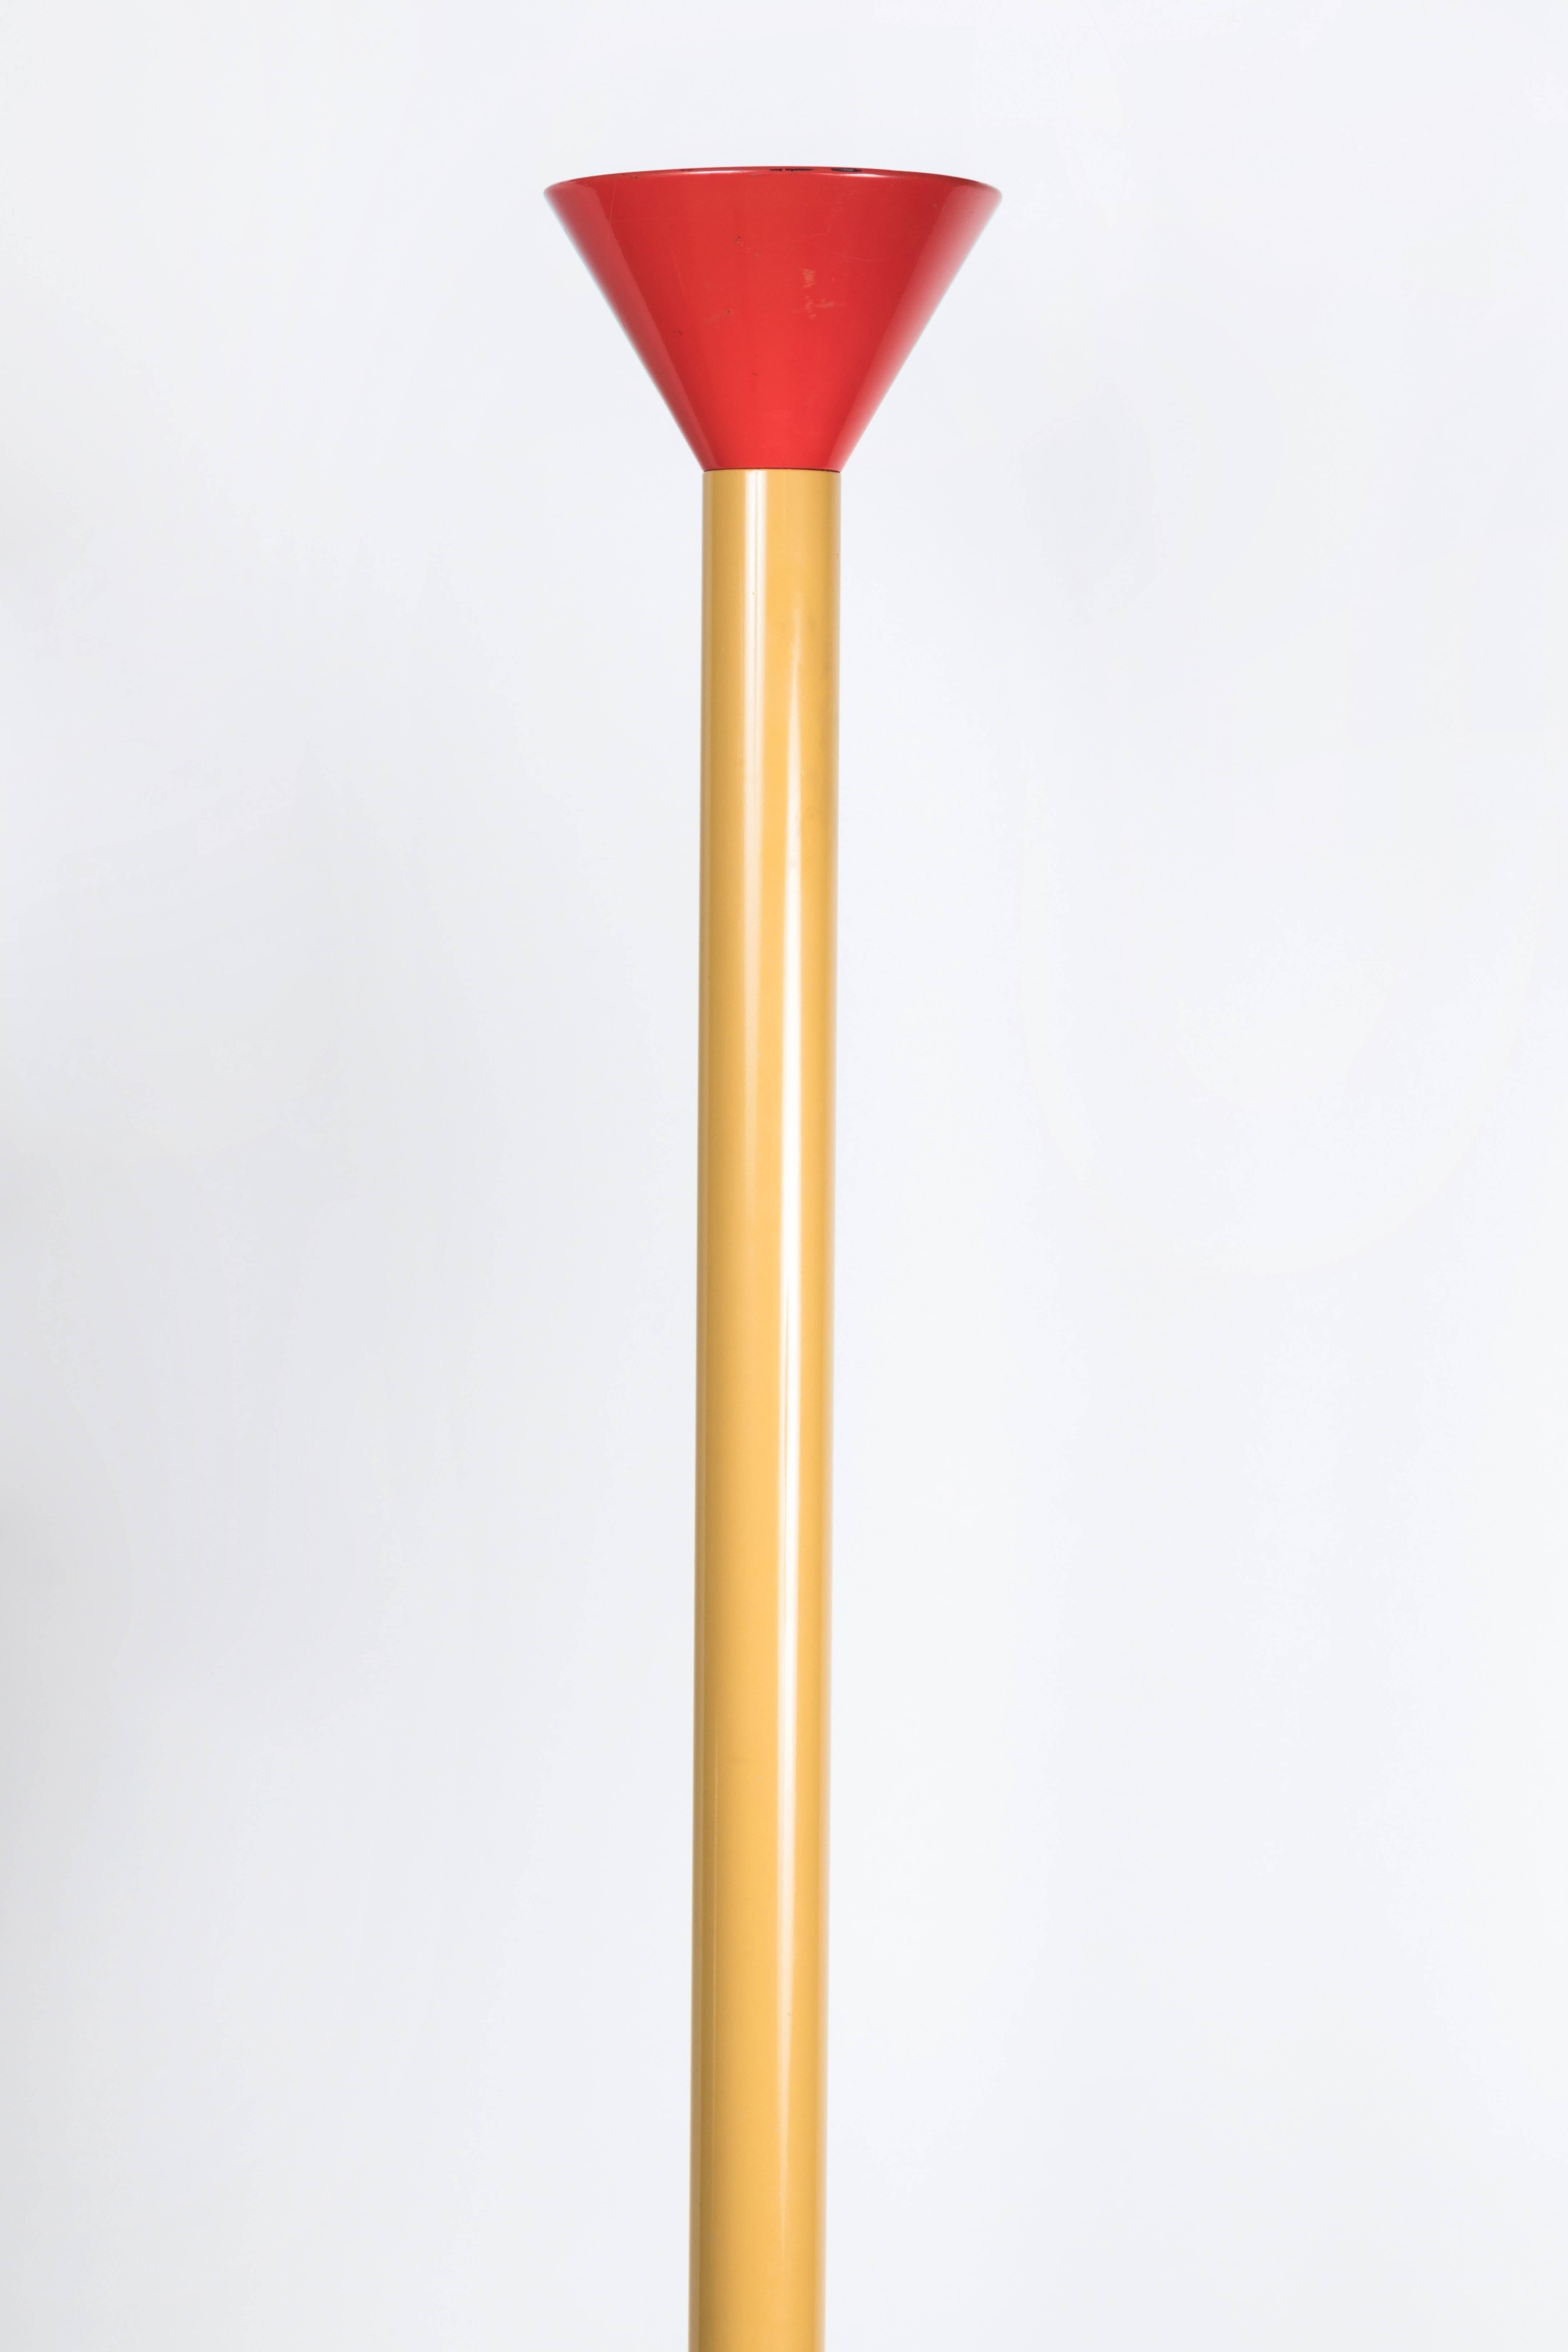 Ettore Sottsass Callimaco floor lamp for Artemide, Italian, created in 1980. Works with European plug with adapter.